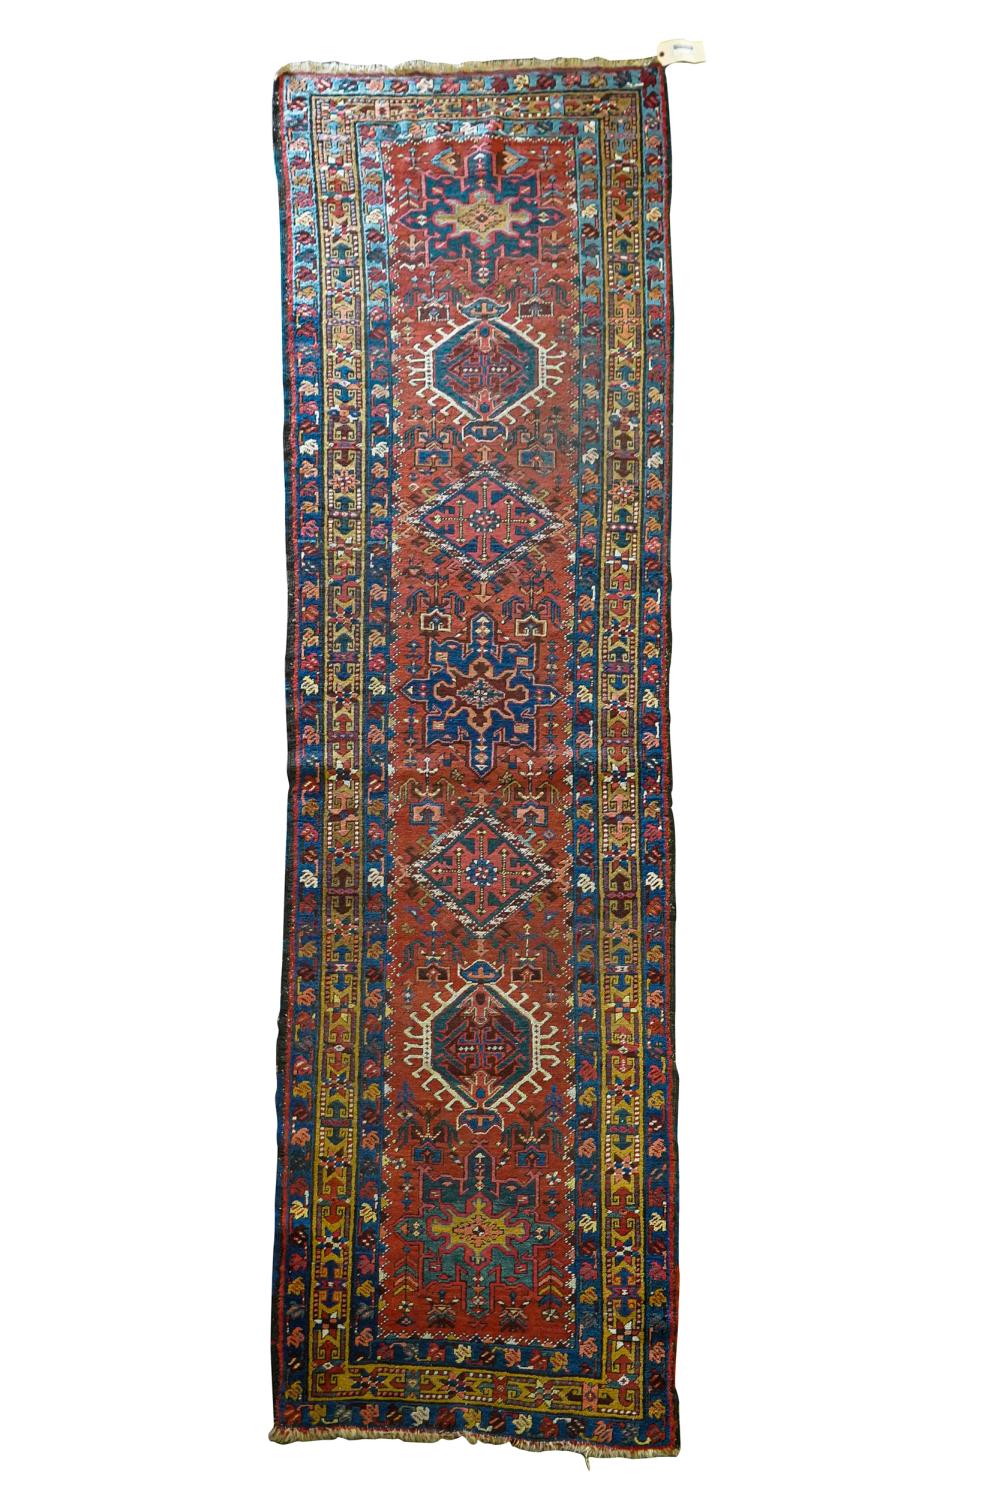 PERSIAN RUNNERred and blue field 3